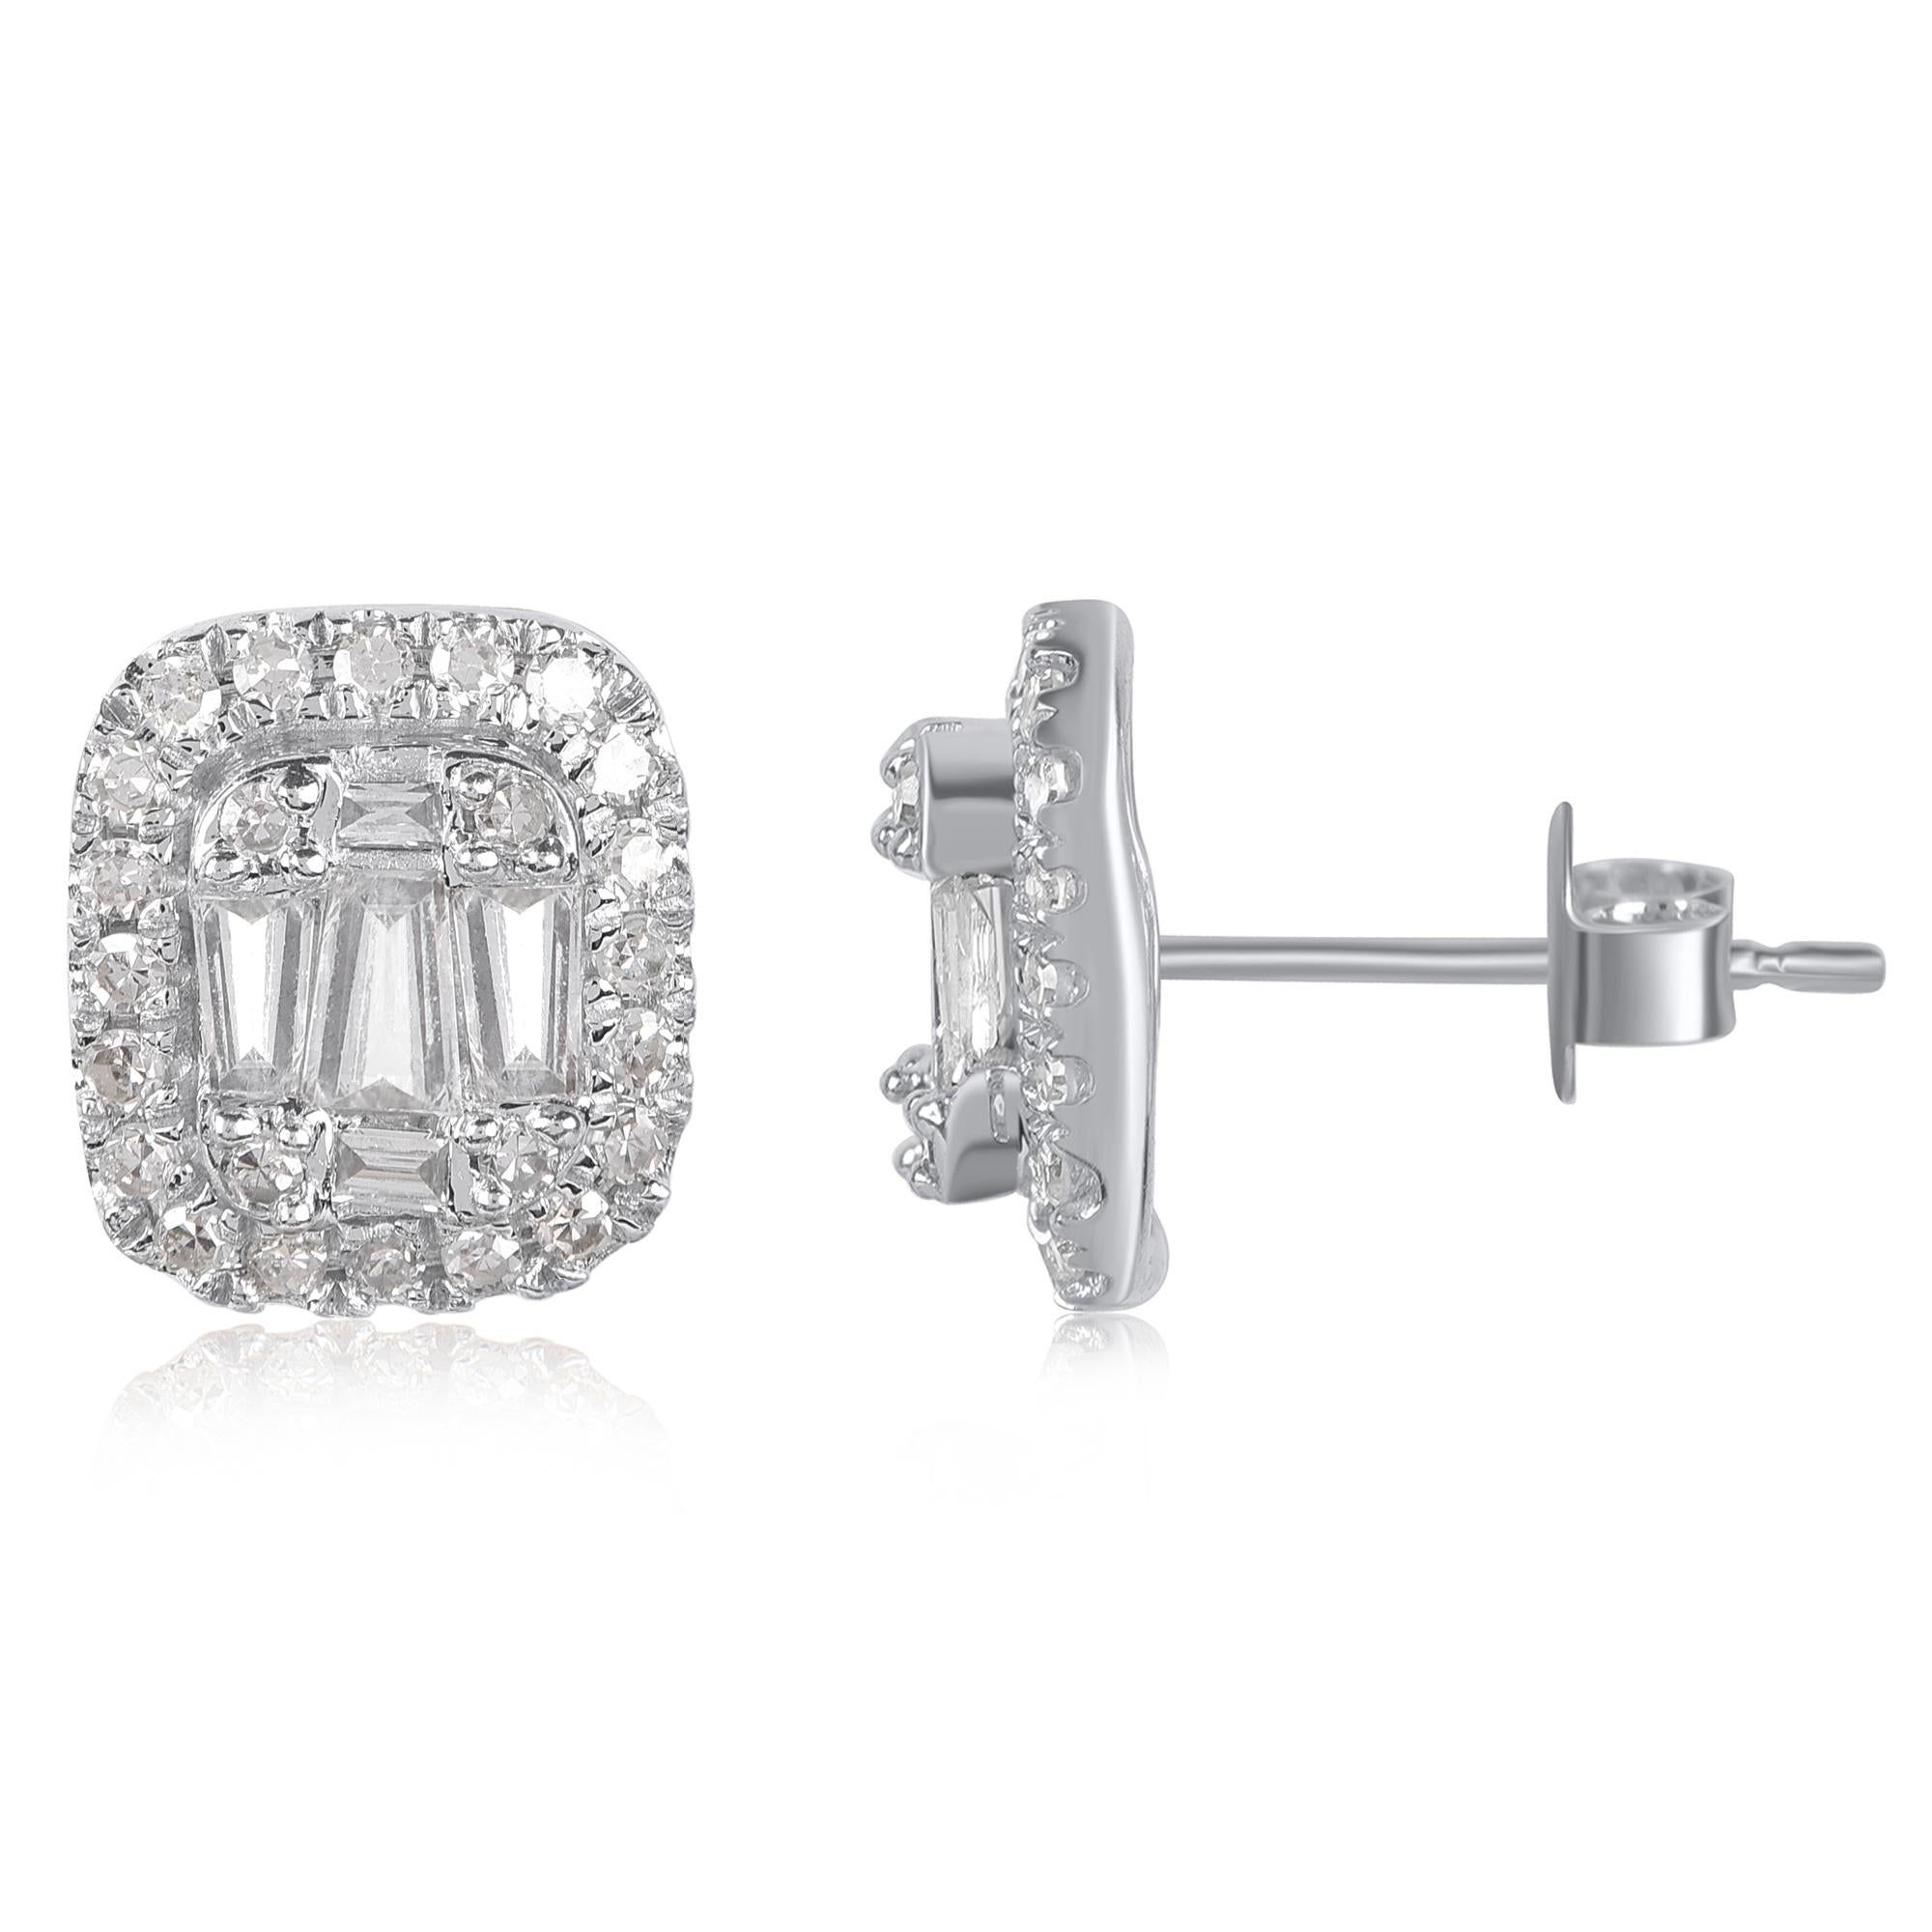 Just her style, these sparkling diamond stud earrings are certain to dazzle and delight. Handcrafted by our experts in 14 karat white gold and studded with 58 round single cut and baguette-cut diamond in pave and channel setting, glitters in H-I